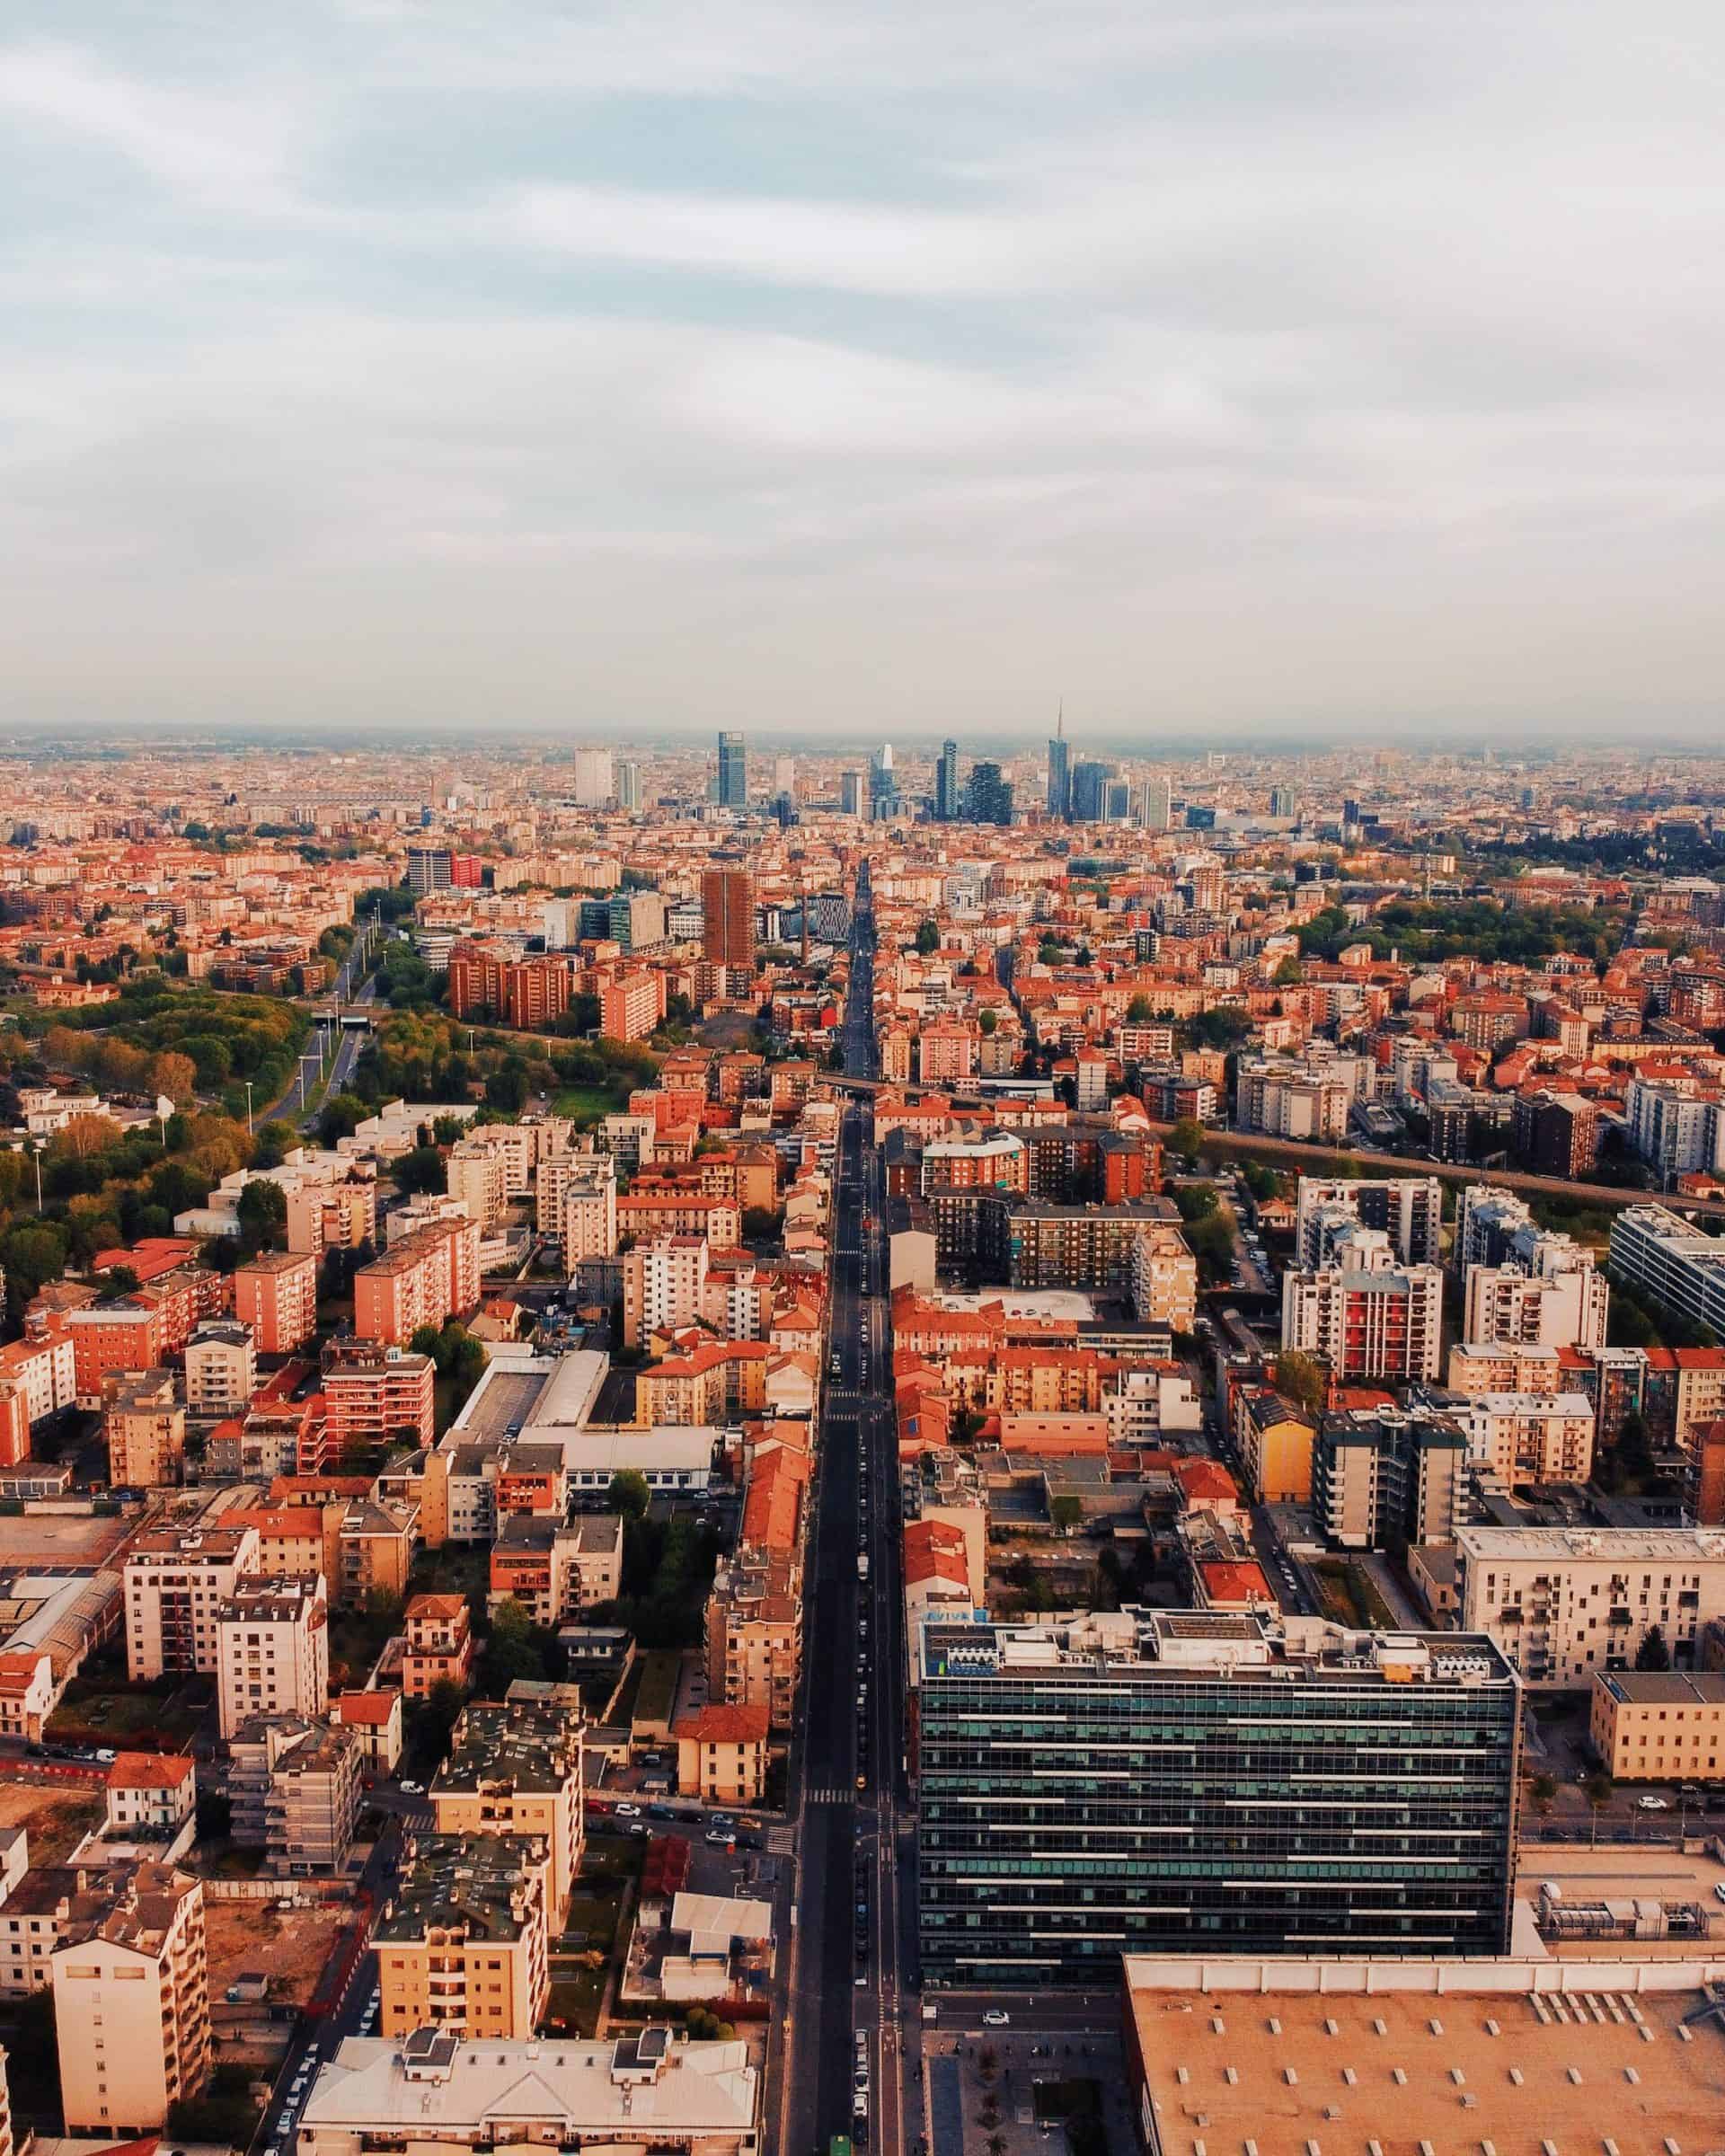 An aerial view of the city of Milan, Italy